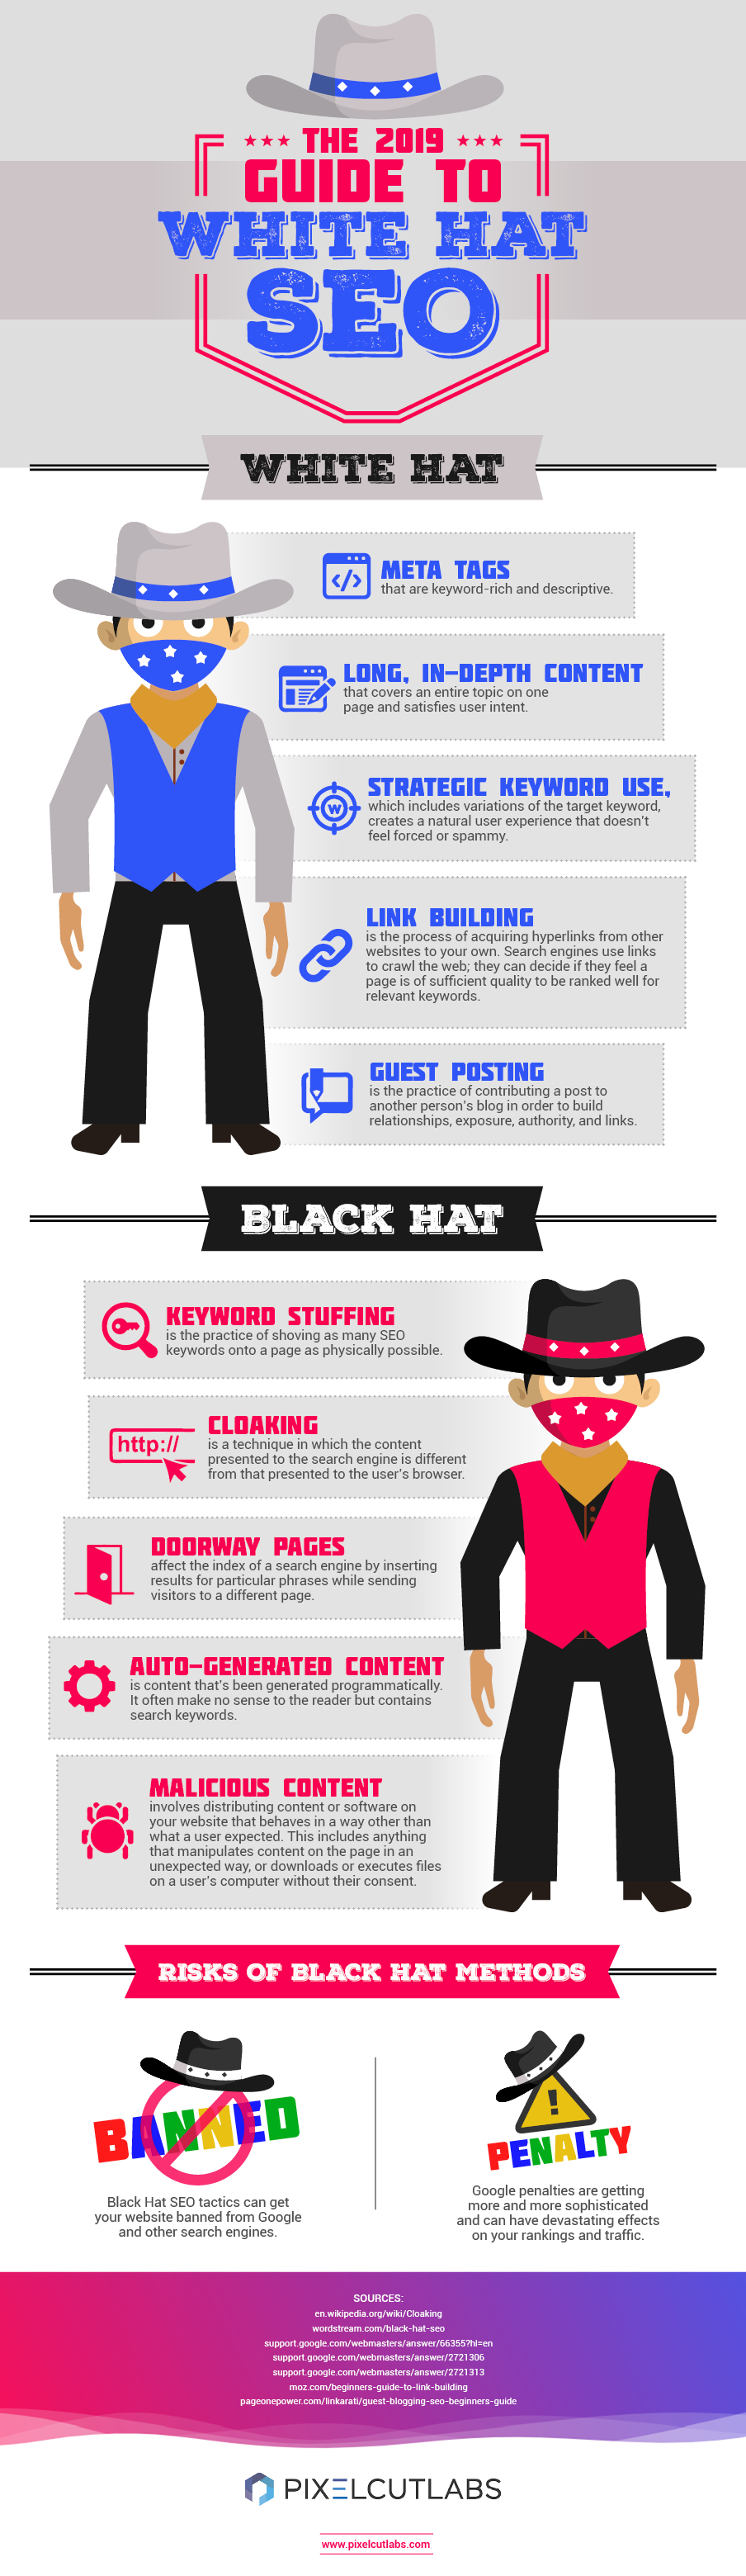 PixelCutLabs visualizes the critical differences between white hat and black hat SEO. It also highlights the risks of black hat techniques